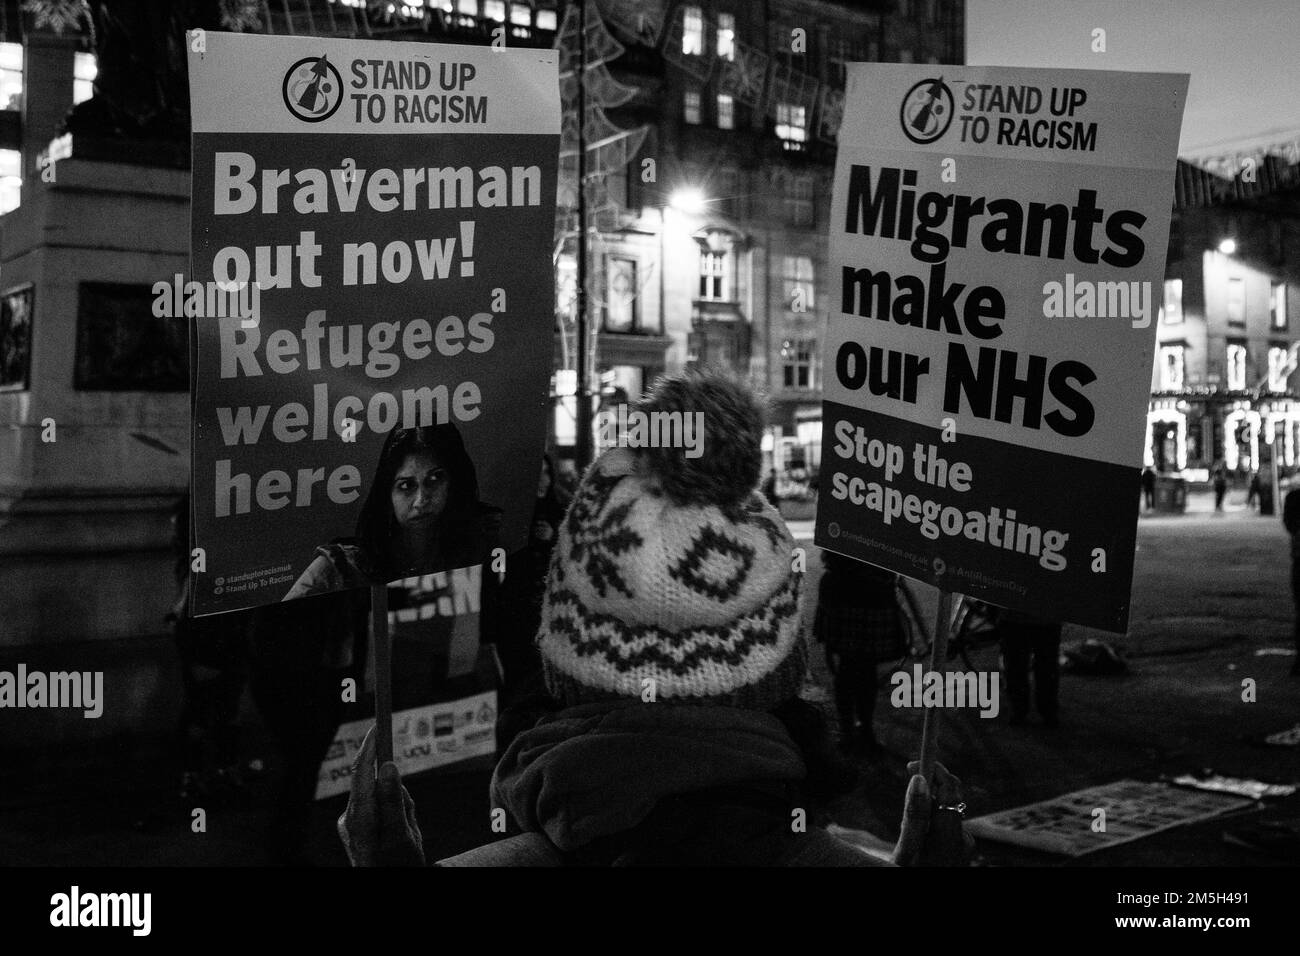 Images from Refugees Welcome event held in George Square Glasgow Stock Photo